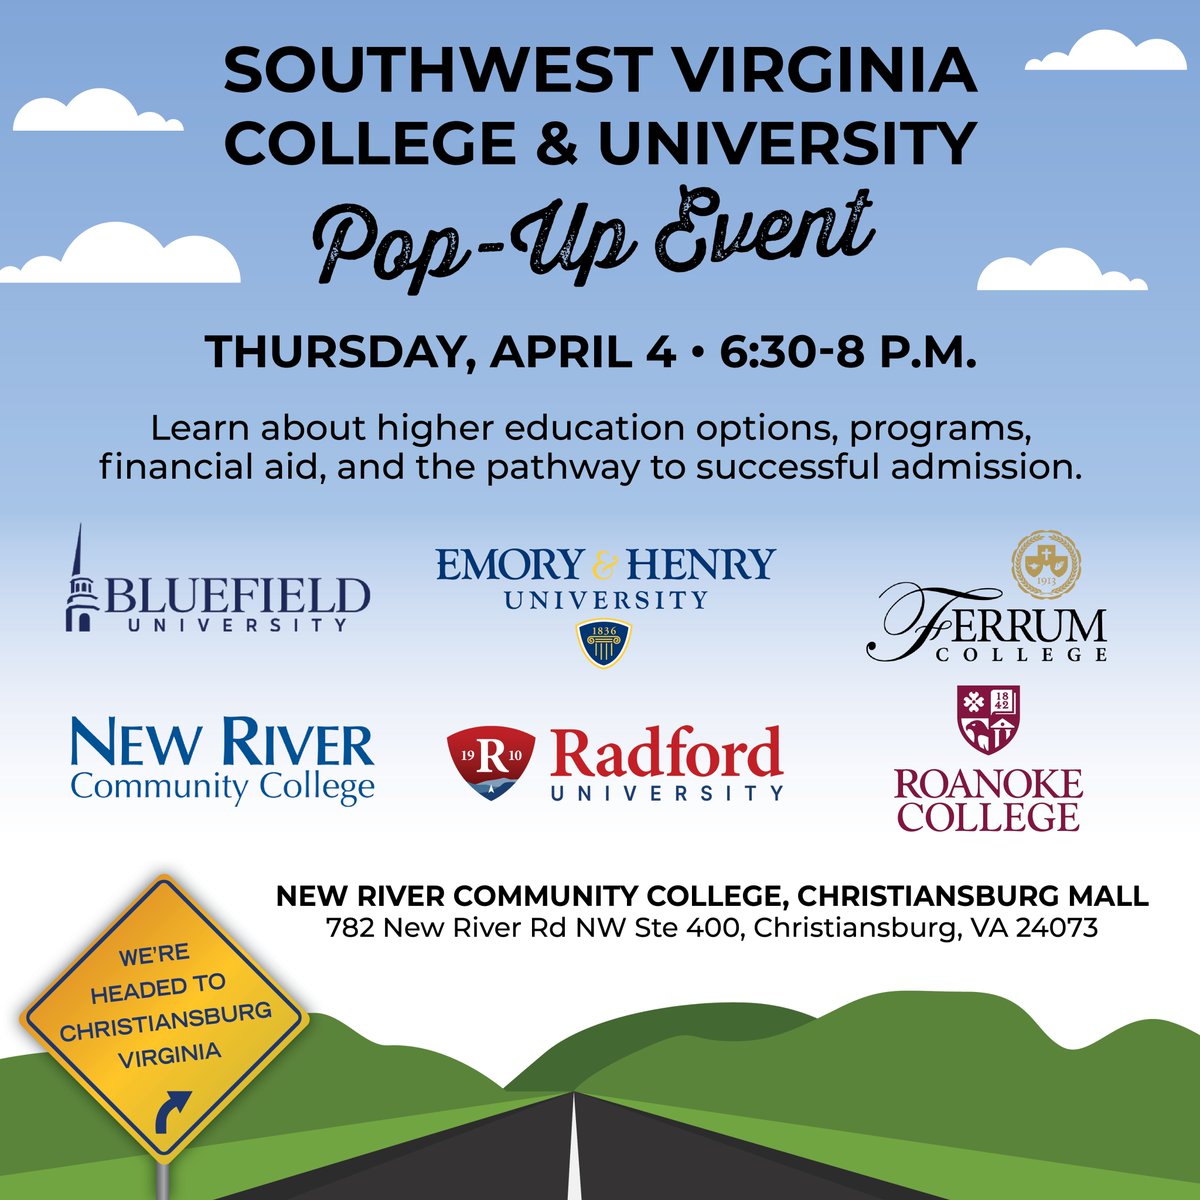 #emoryandhenry is proud to participate in the Southwest Virginia College & University Pop-Up Event in Christiansburg, Va., on Thursday, April 4, from 6:30-8 p.m. at the New River Community College Christiansburg mall location. Sign up at ehc.edu/swvapopup.